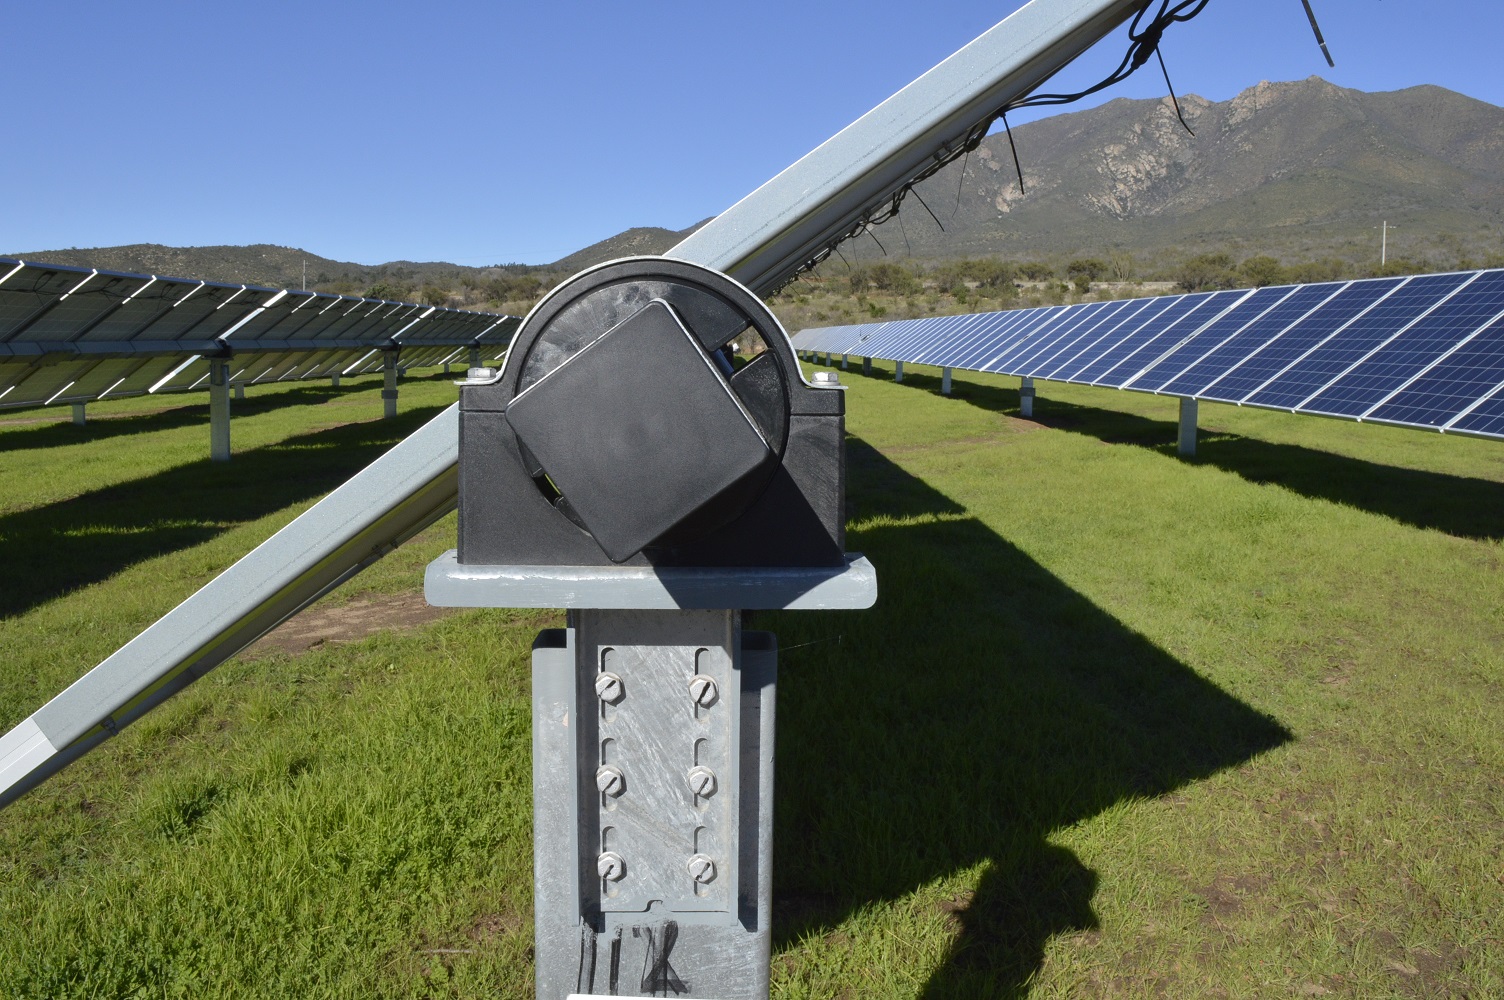 NCLAVE provides its axis followers for a 125 MW solar tracker project in Australia